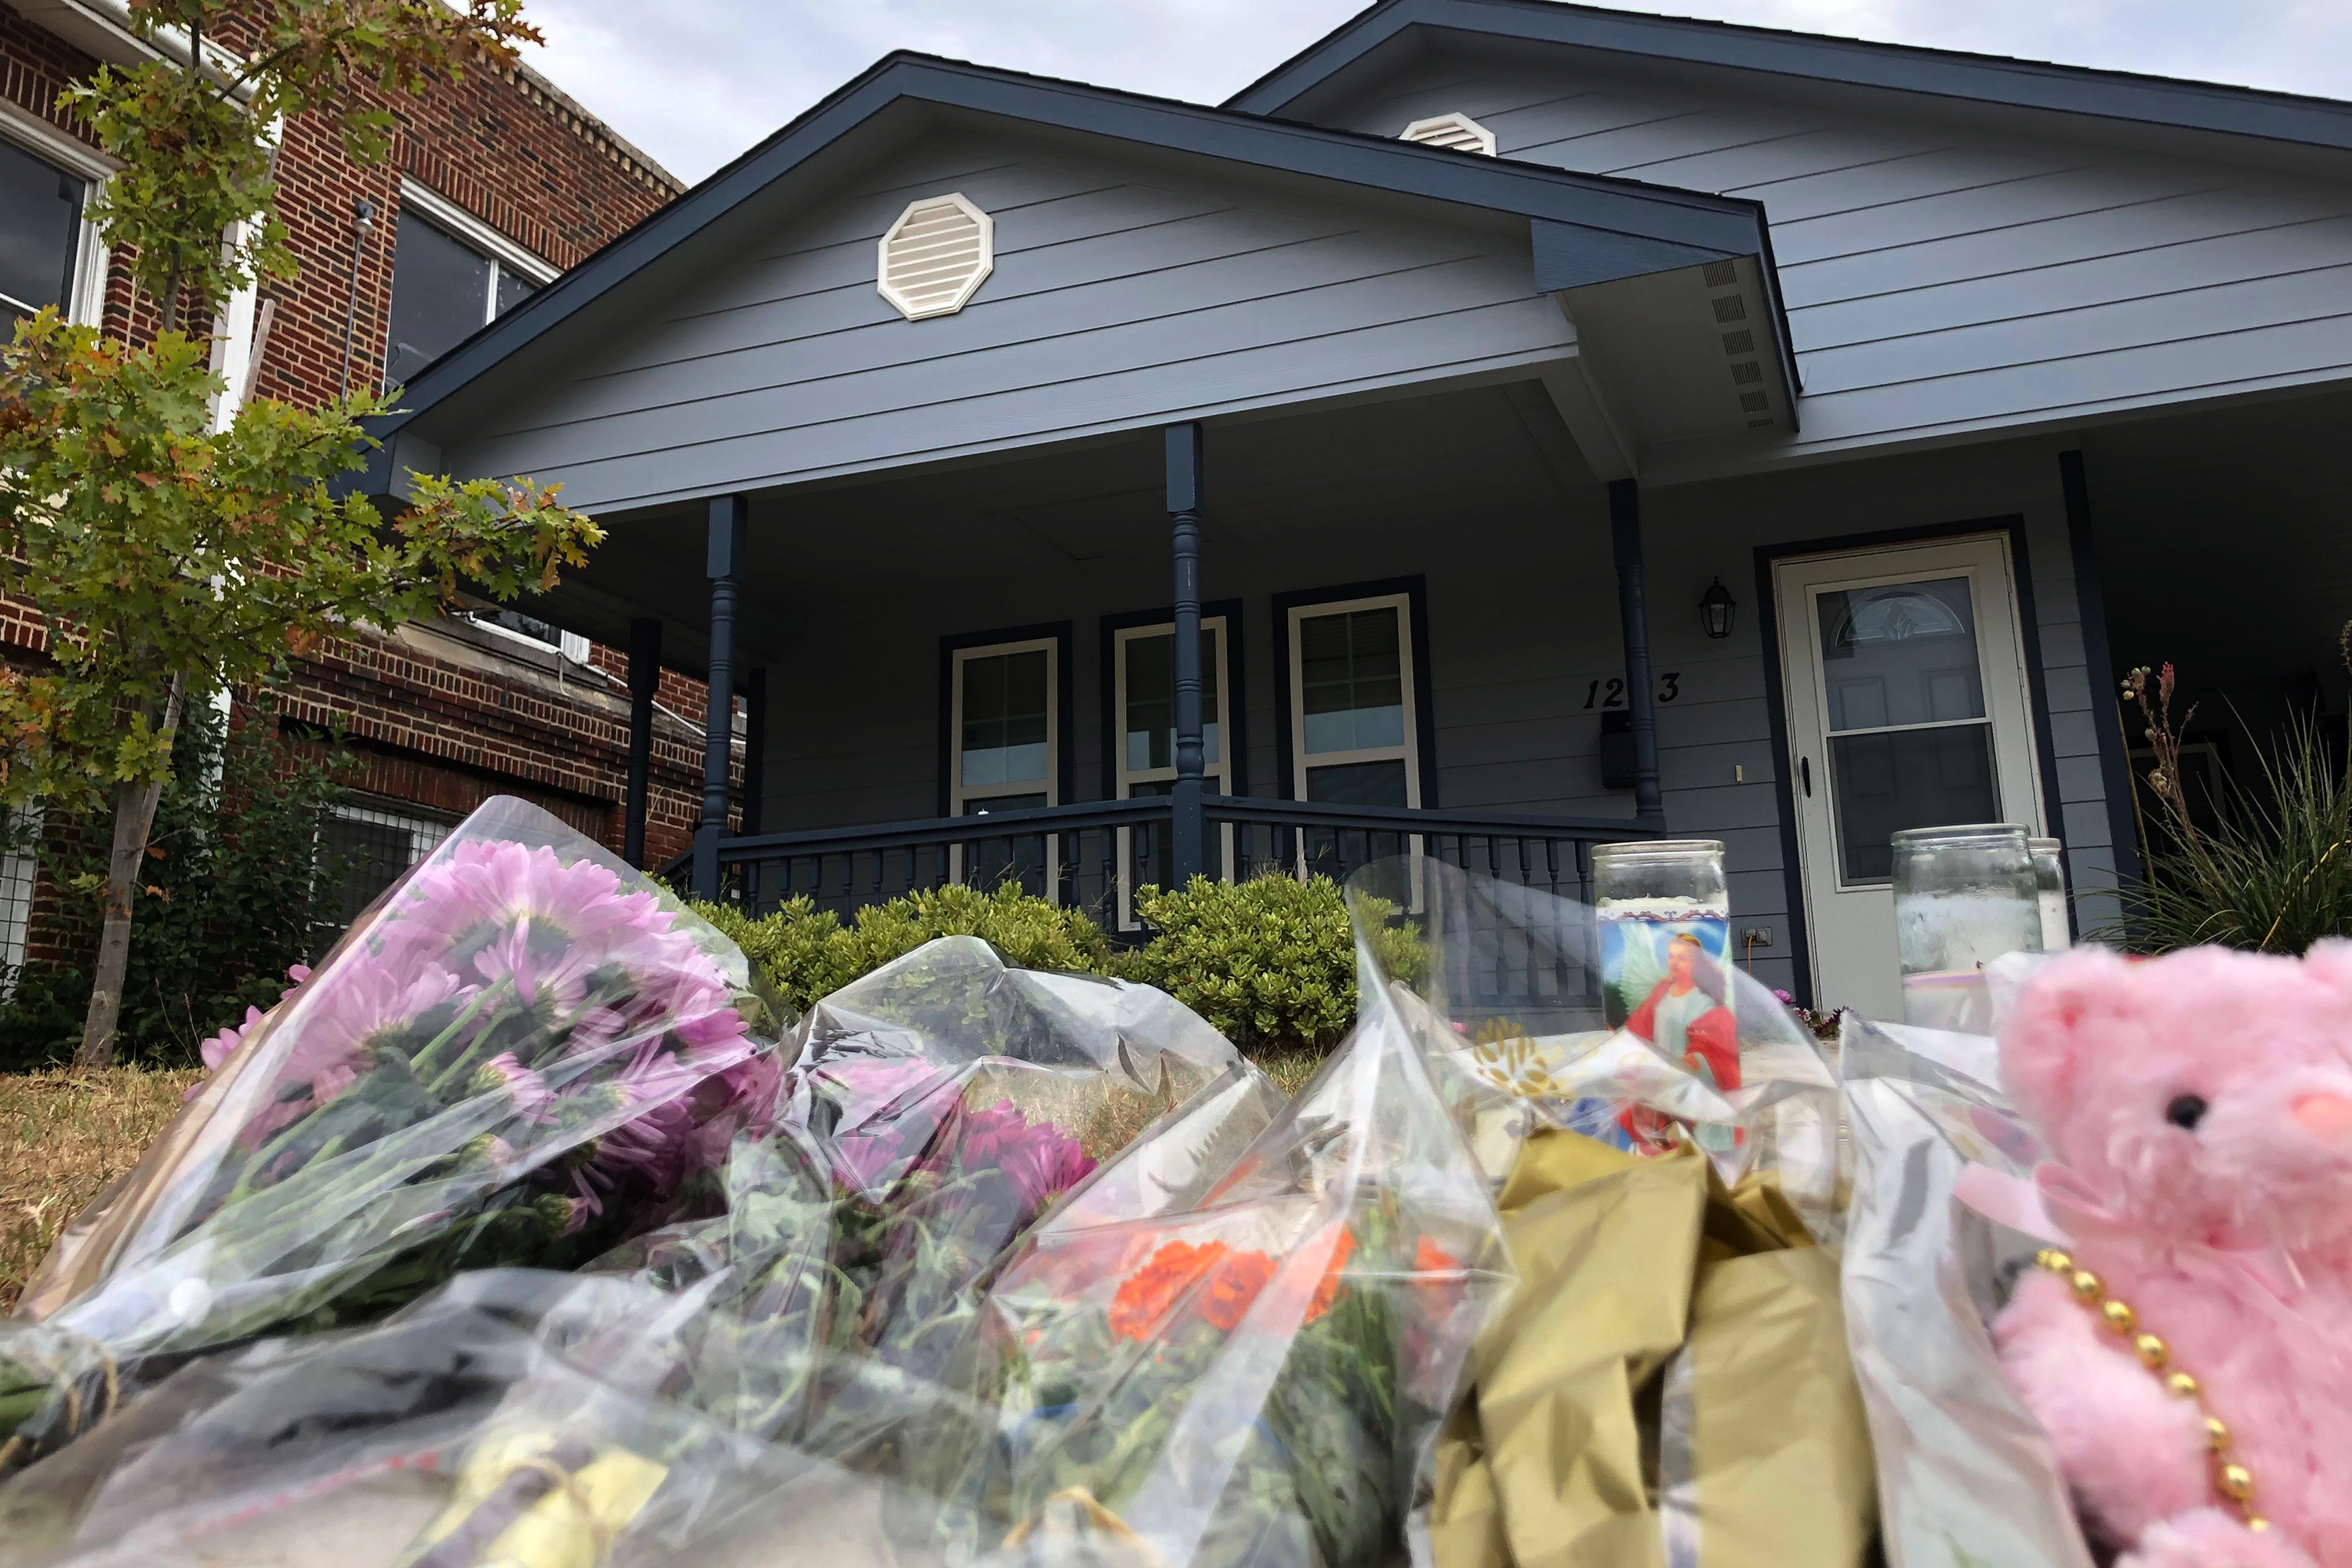 Bouquets of flowers and stuffed animals are piling up outside the Fort Worth home Monday, Oct. 14, 2019, where a 28-year-old black woman was shot to death by a white police officer. Members of the community have brought tributes to the home where Atatiana Jefferson was killed early Saturday by an officer who was responding to a neighbor's report of an open door. (Jake Bleiberg—AP)